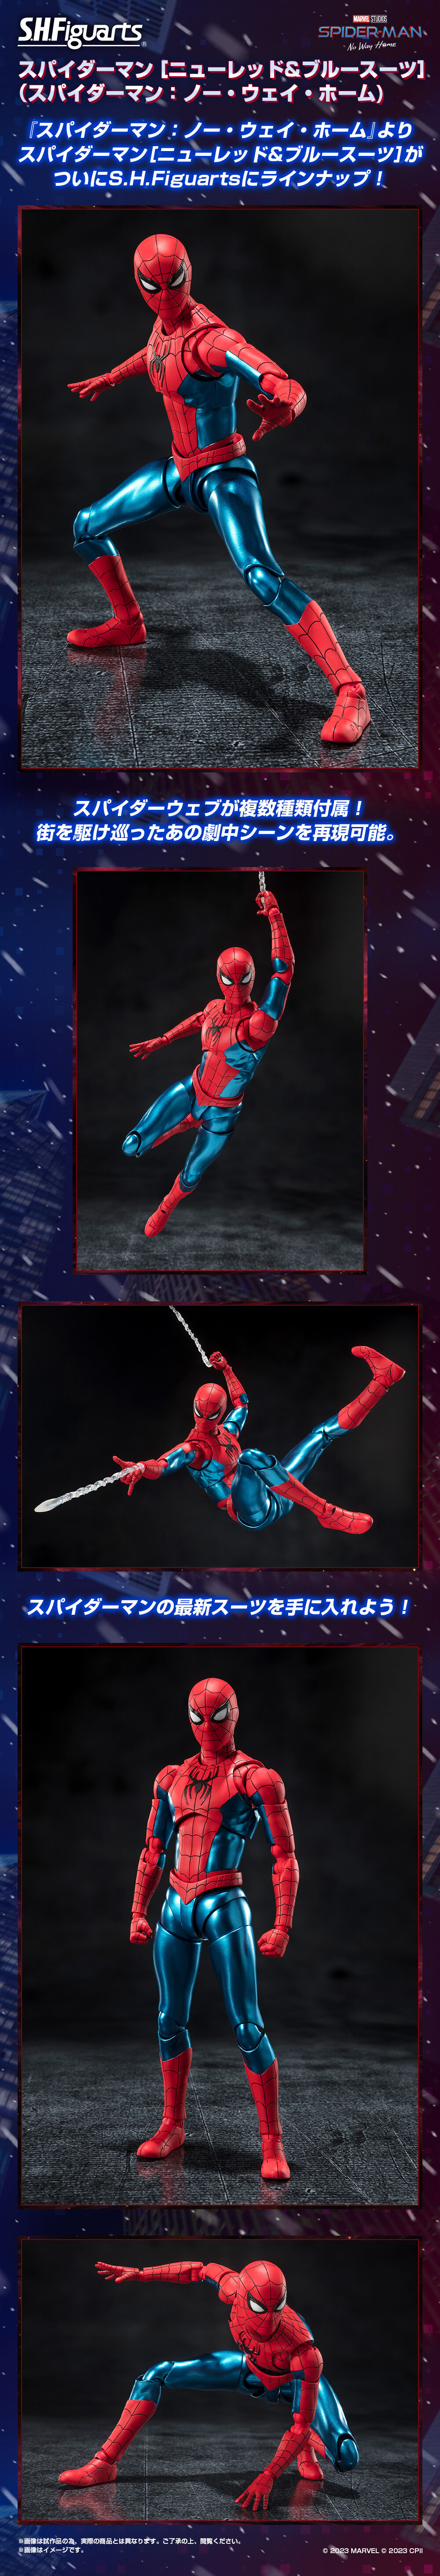 S.H.Figuarts Spider-Man [New Red & Blue Suit] (Spider-Man: No Way Home)  Action Figure